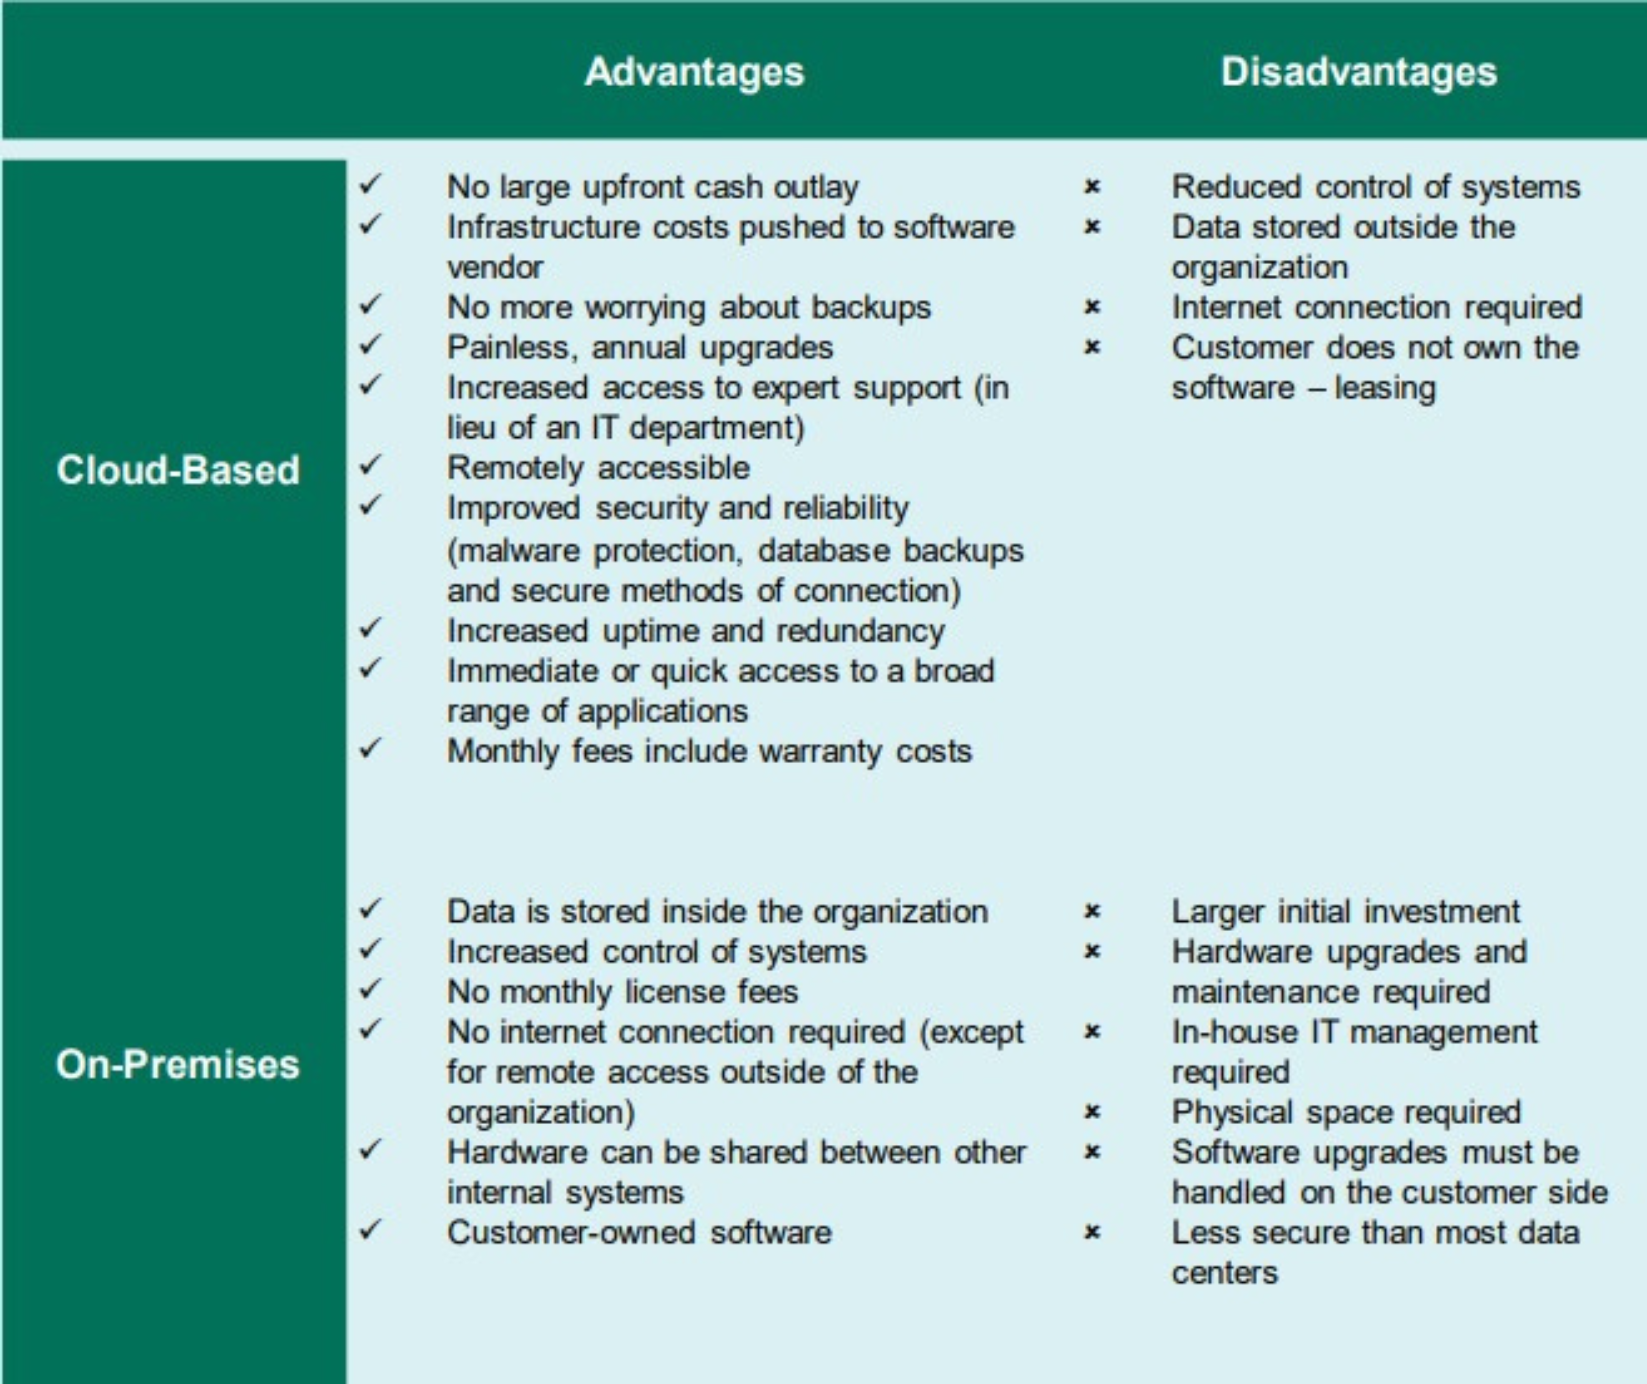 Comparing the advantages and disadvantages of cloud-based software and on-premises software.